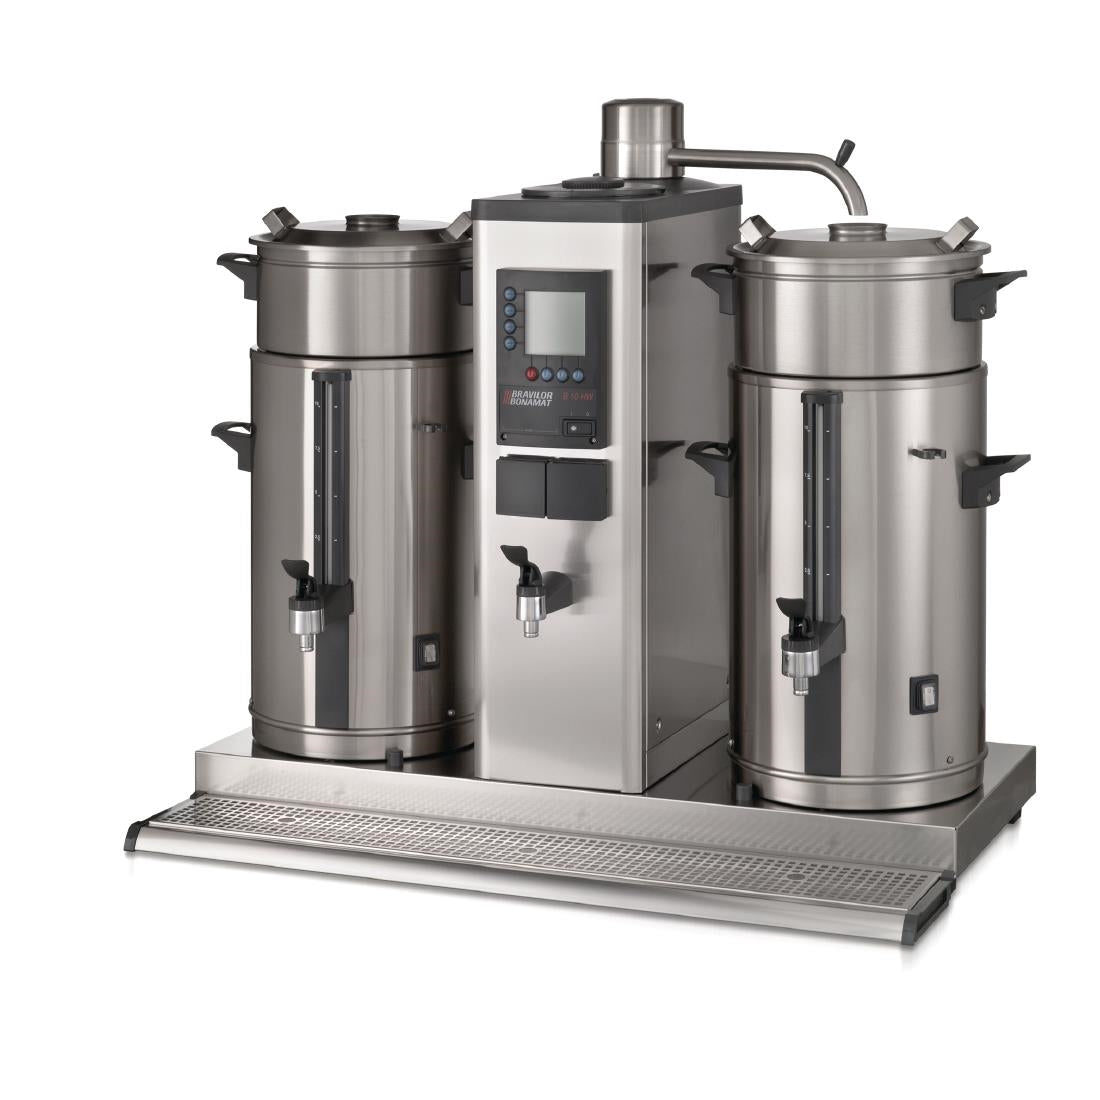 DC690-3P50 Bravilor B10 HW5 Bulk Coffee Brewer with 2x10Ltr Coffee Urns and Hot Water Tap 3 Phase JD Catering Equipment Solutions Ltd